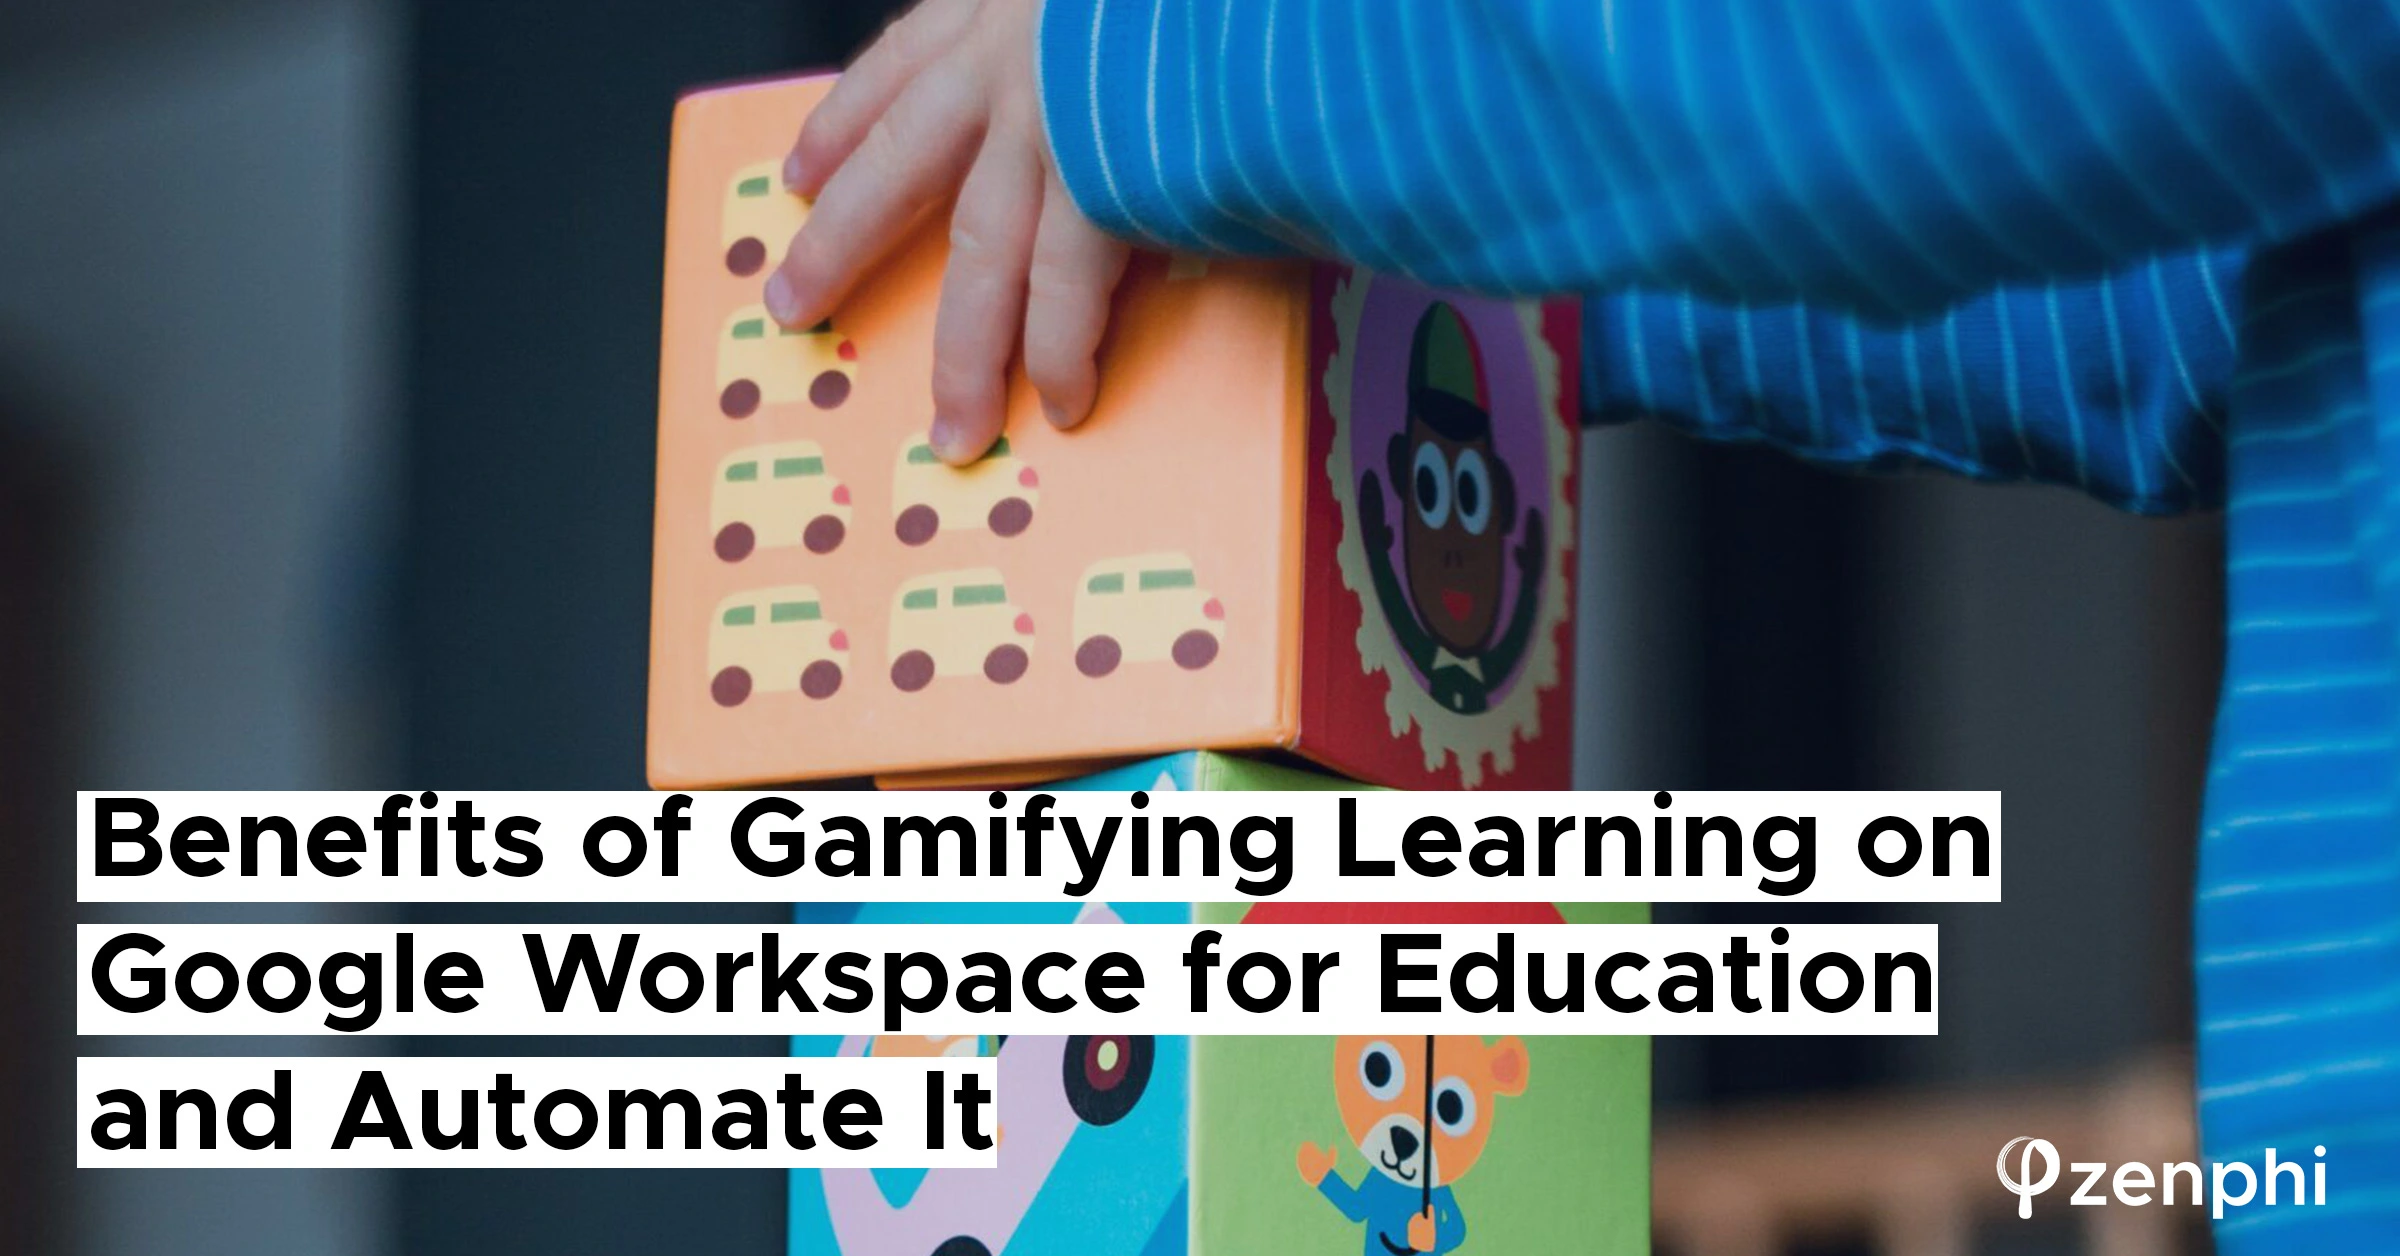 Gamifying Learning on Google Workspace for Education and Automate It